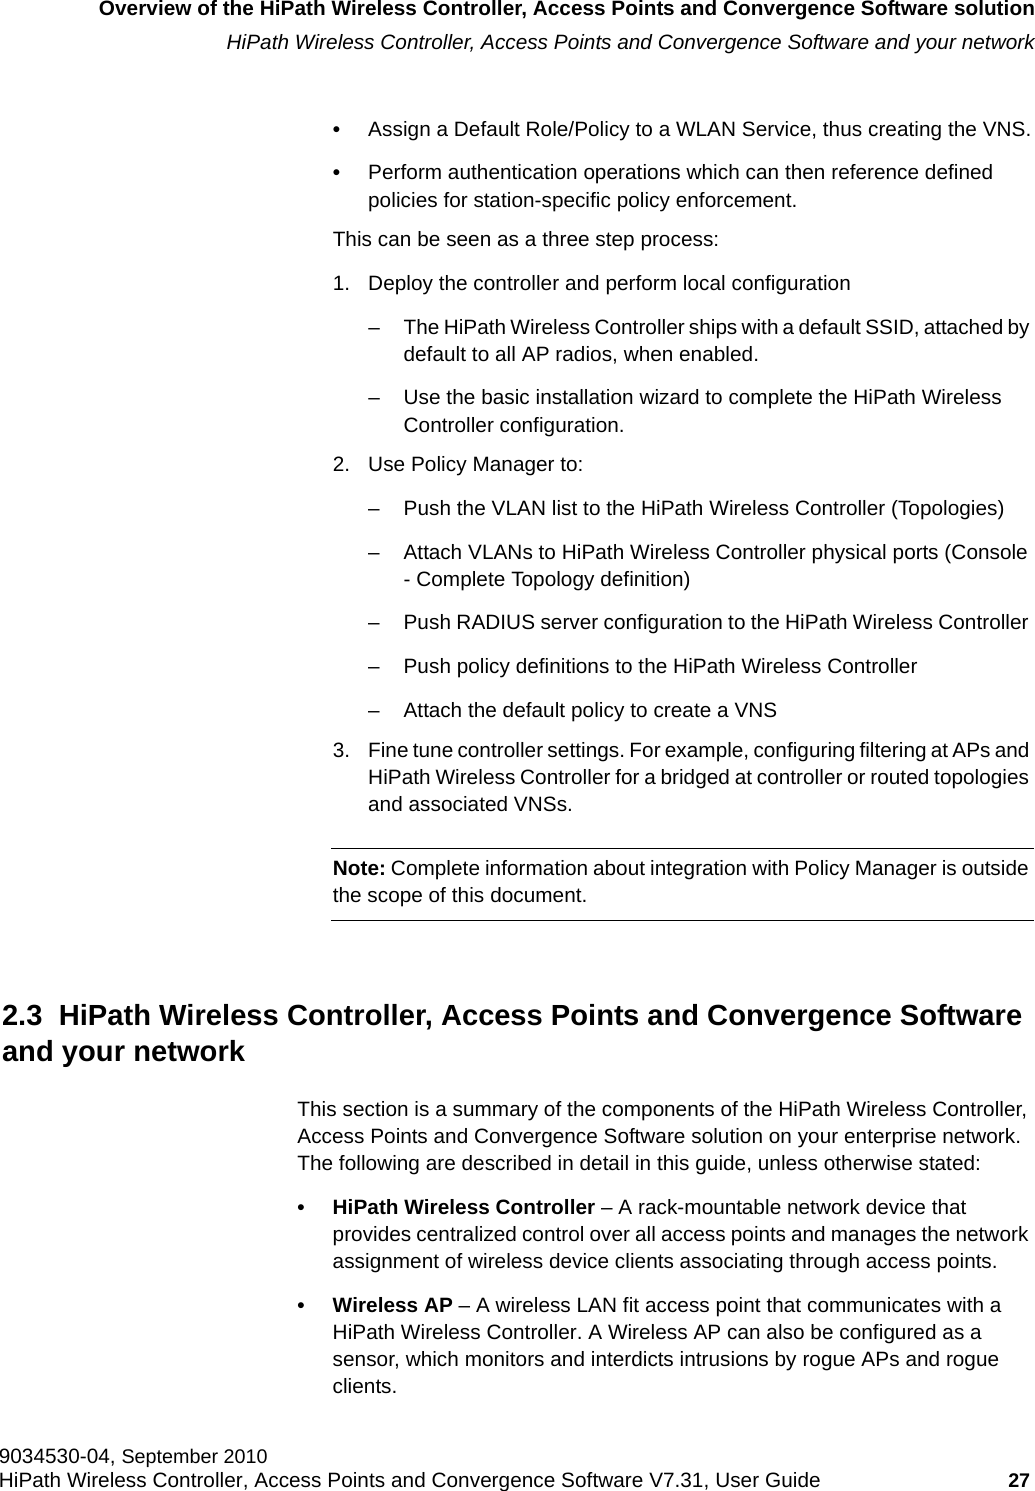 hwc_intro.fmOverview of the HiPath Wireless Controller, Access Points and Convergence Software solutionHiPath Wireless Controller, Access Points and Convergence Software and your network9034530-04, September 2010HiPath Wireless Controller, Access Points and Convergence Software V7.31, User Guide 27         •Assign a Default Role/Policy to a WLAN Service, thus creating the VNS.•Perform authentication operations which can then reference defined policies for station-specific policy enforcement.This can be seen as a three step process:1. Deploy the controller and perform local configuration– The HiPath Wireless Controller ships with a default SSID, attached by default to all AP radios, when enabled.– Use the basic installation wizard to complete the HiPath Wireless Controller configuration.2. Use Policy Manager to:– Push the VLAN list to the HiPath Wireless Controller (Topologies)– Attach VLANs to HiPath Wireless Controller physical ports (Console - Complete Topology definition)– Push RADIUS server configuration to the HiPath Wireless Controller – Push policy definitions to the HiPath Wireless Controller – Attach the default policy to create a VNS3. Fine tune controller settings. For example, configuring filtering at APs and HiPath Wireless Controller for a bridged at controller or routed topologies and associated VNSs.Note: Complete information about integration with Policy Manager is outside the scope of this document.2.3  HiPath Wireless Controller, Access Points and Convergence Software and your networkThis section is a summary of the components of the HiPath Wireless Controller, Access Points and Convergence Software solution on your enterprise network. The following are described in detail in this guide, unless otherwise stated:• HiPath Wireless Controller – A rack-mountable network device that provides centralized control over all access points and manages the network assignment of wireless device clients associating through access points.• Wireless AP – A wireless LAN fit access point that communicates with a HiPath Wireless Controller. A Wireless AP can also be configured as a sensor, which monitors and interdicts intrusions by rogue APs and rogue clients.